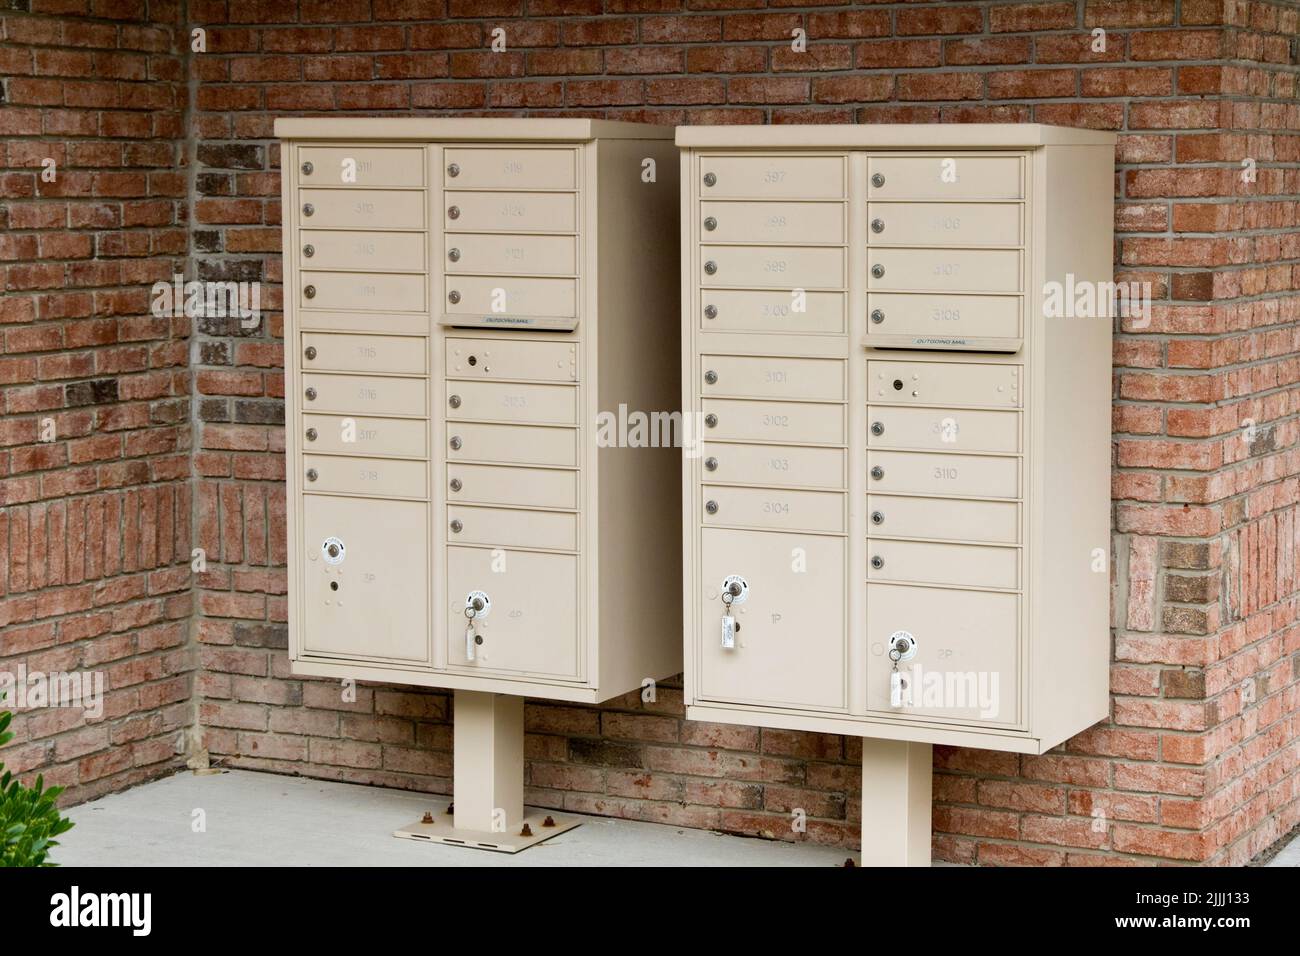 Apartment mail boxes at entrance of high rise building. Stock Photo